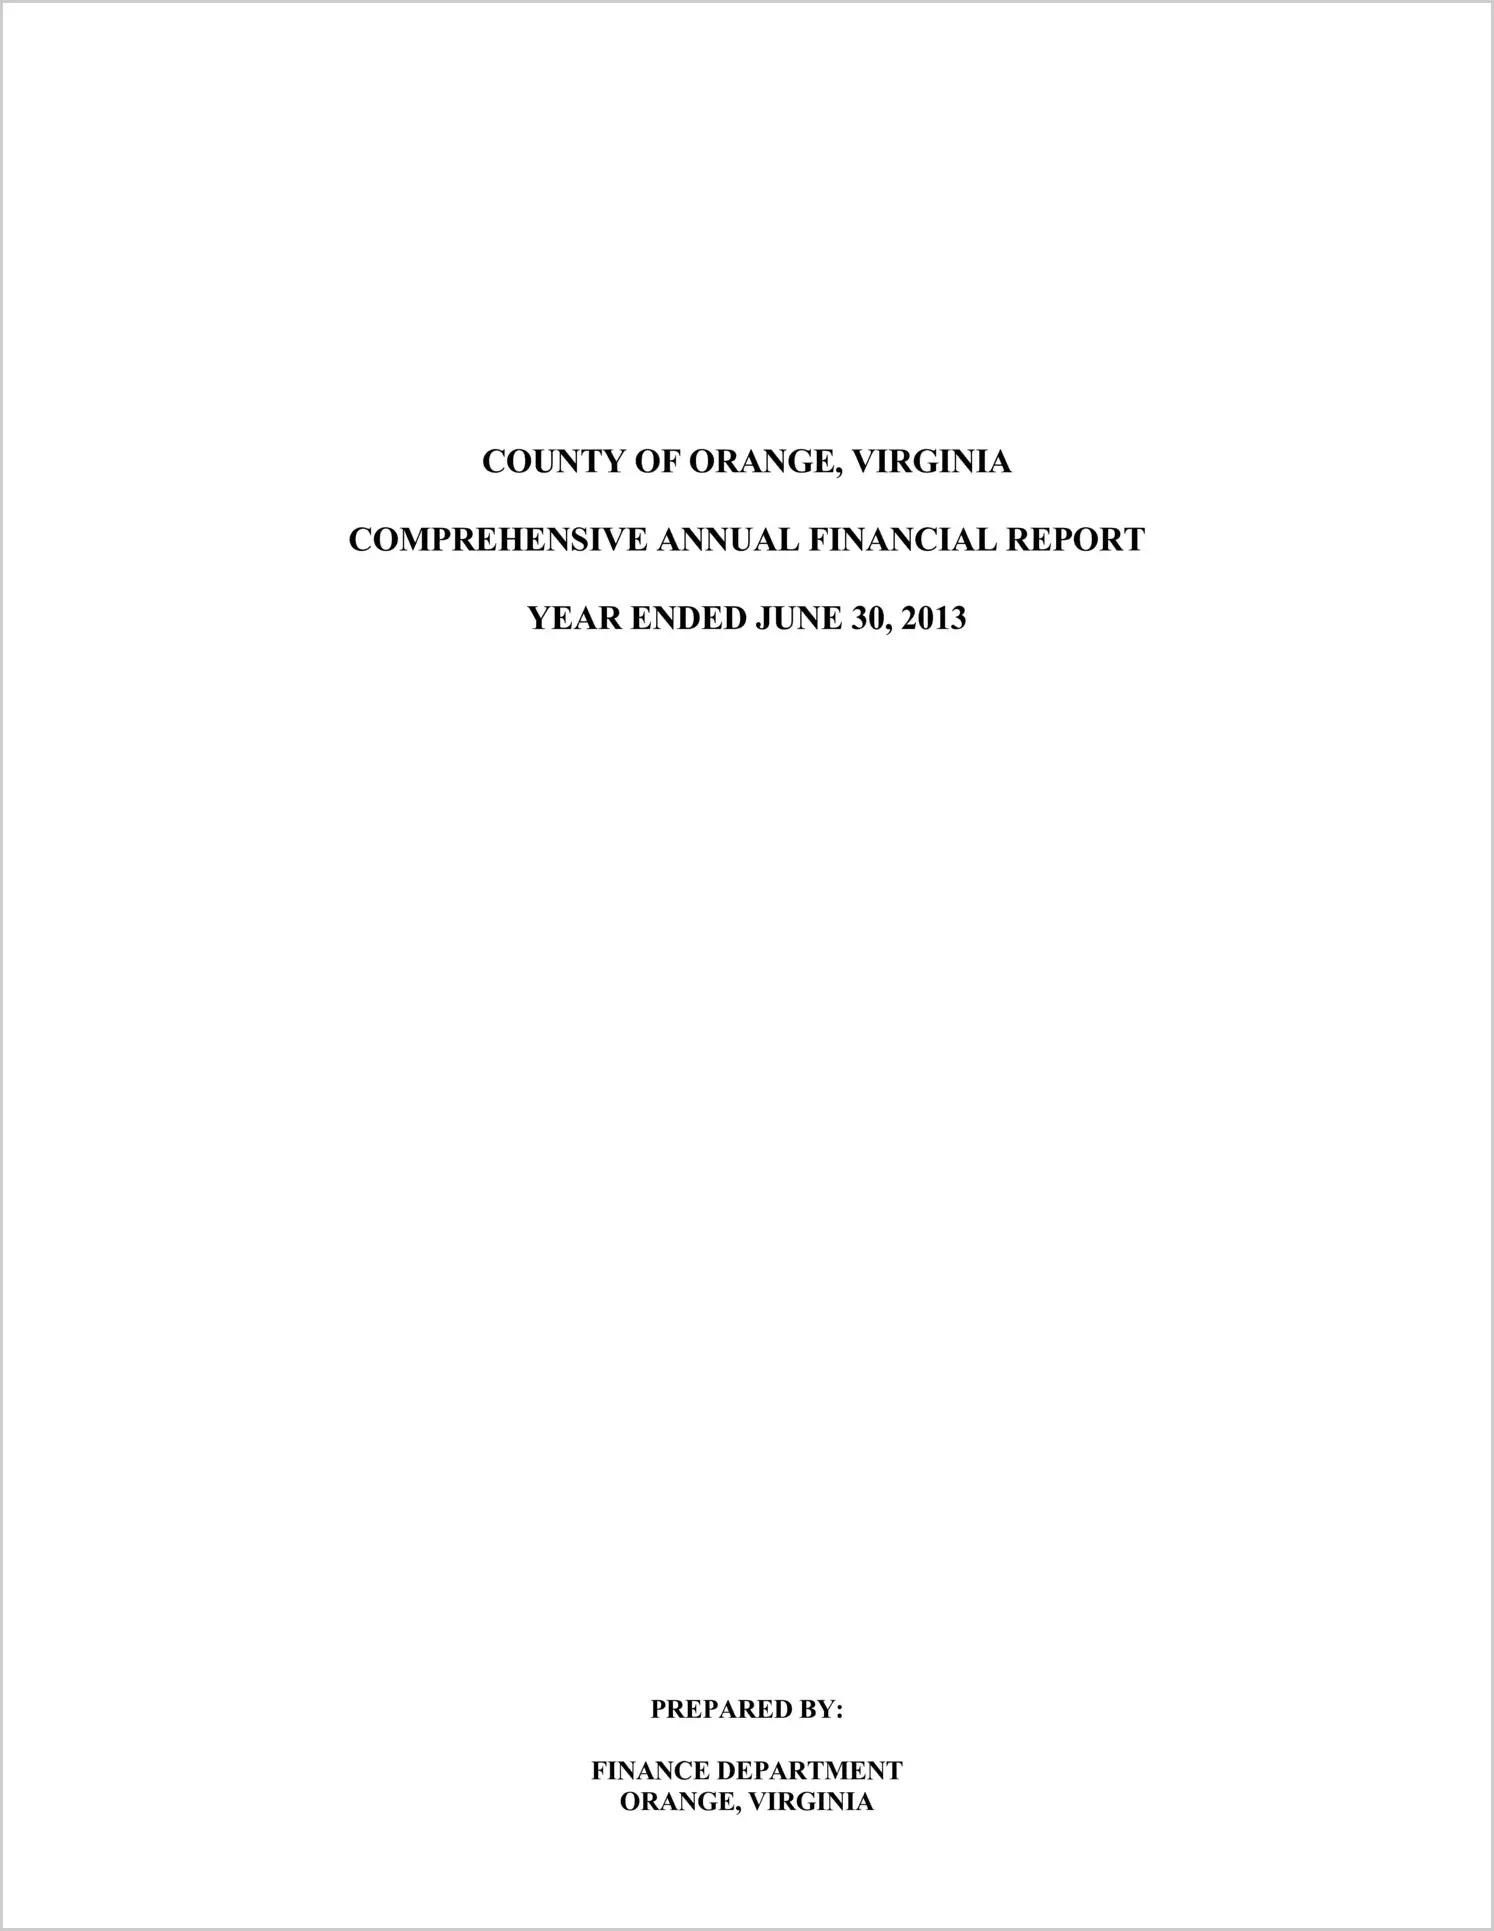 2013 Annual Financial Report for County of Orange